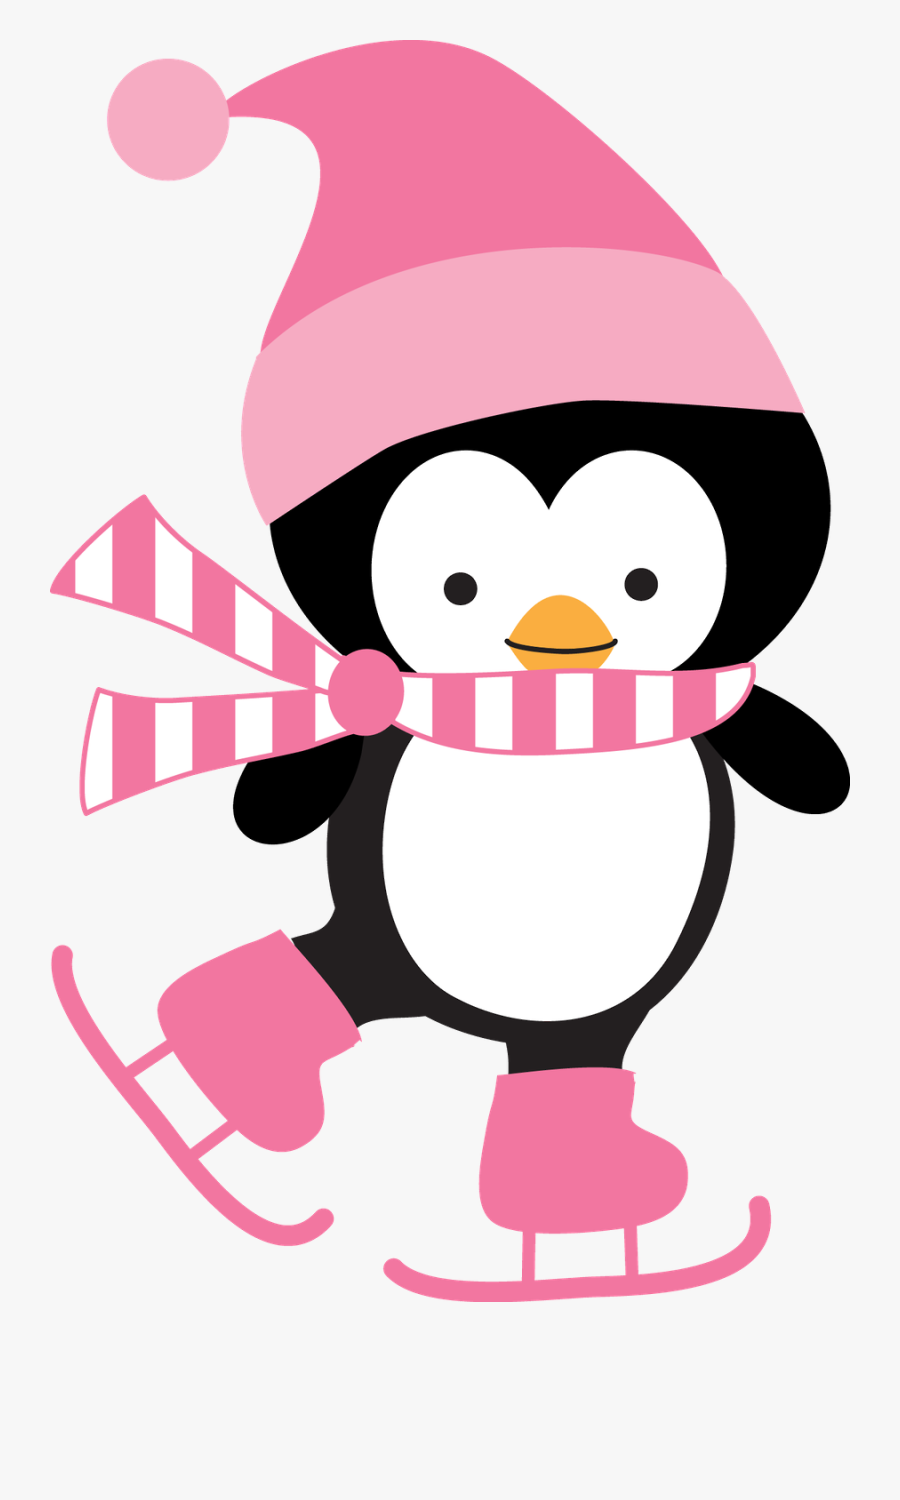 Holiday Clipart Penguin - Ice Skating Penguin Clip Art, Transparent Clipart